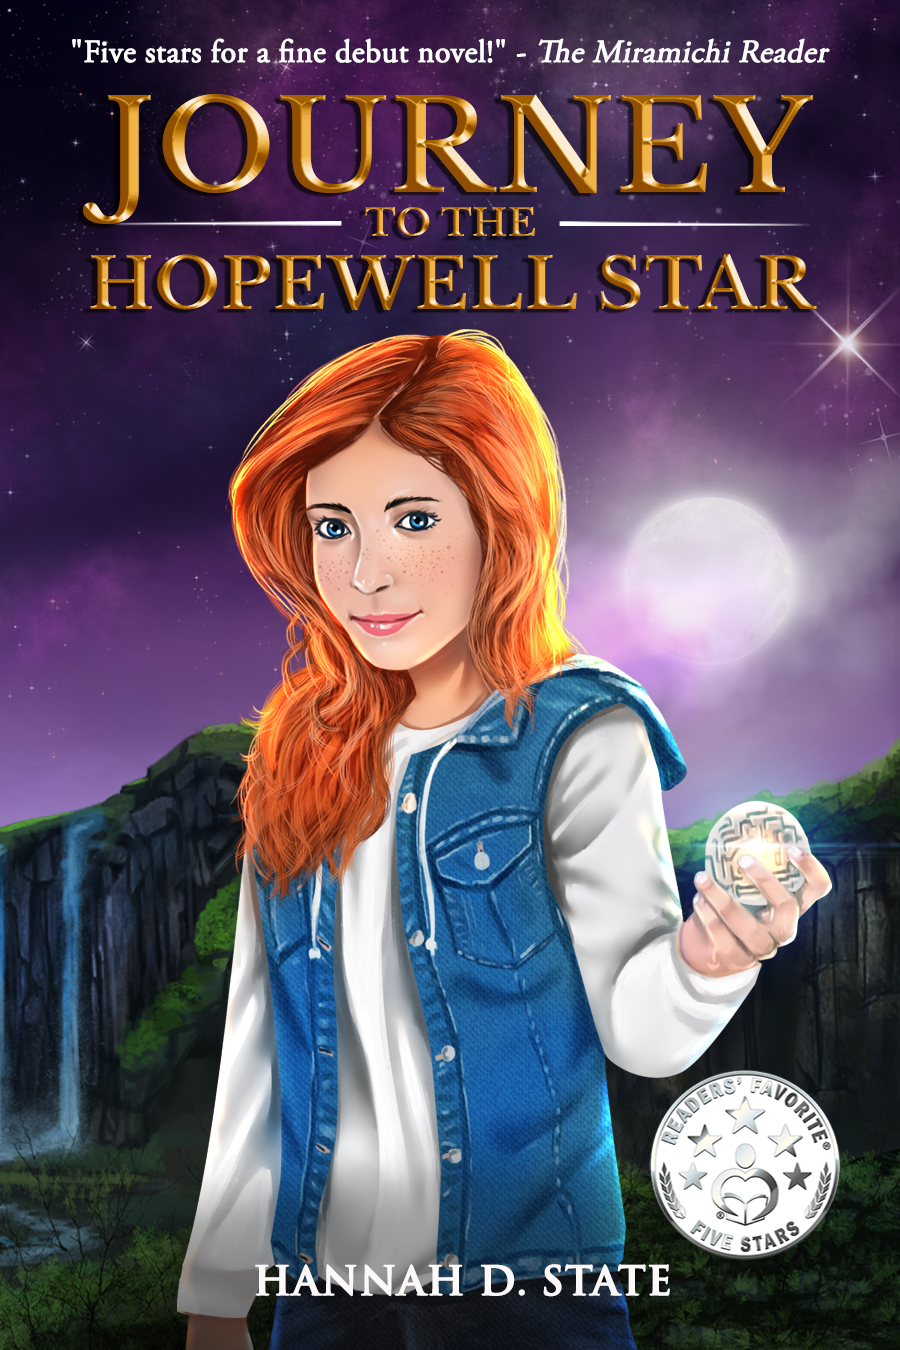 Journey to the Hopewell Star – You Don’t Want to Miss this Debut YA Book By Award-Winning Author Hannah D. State